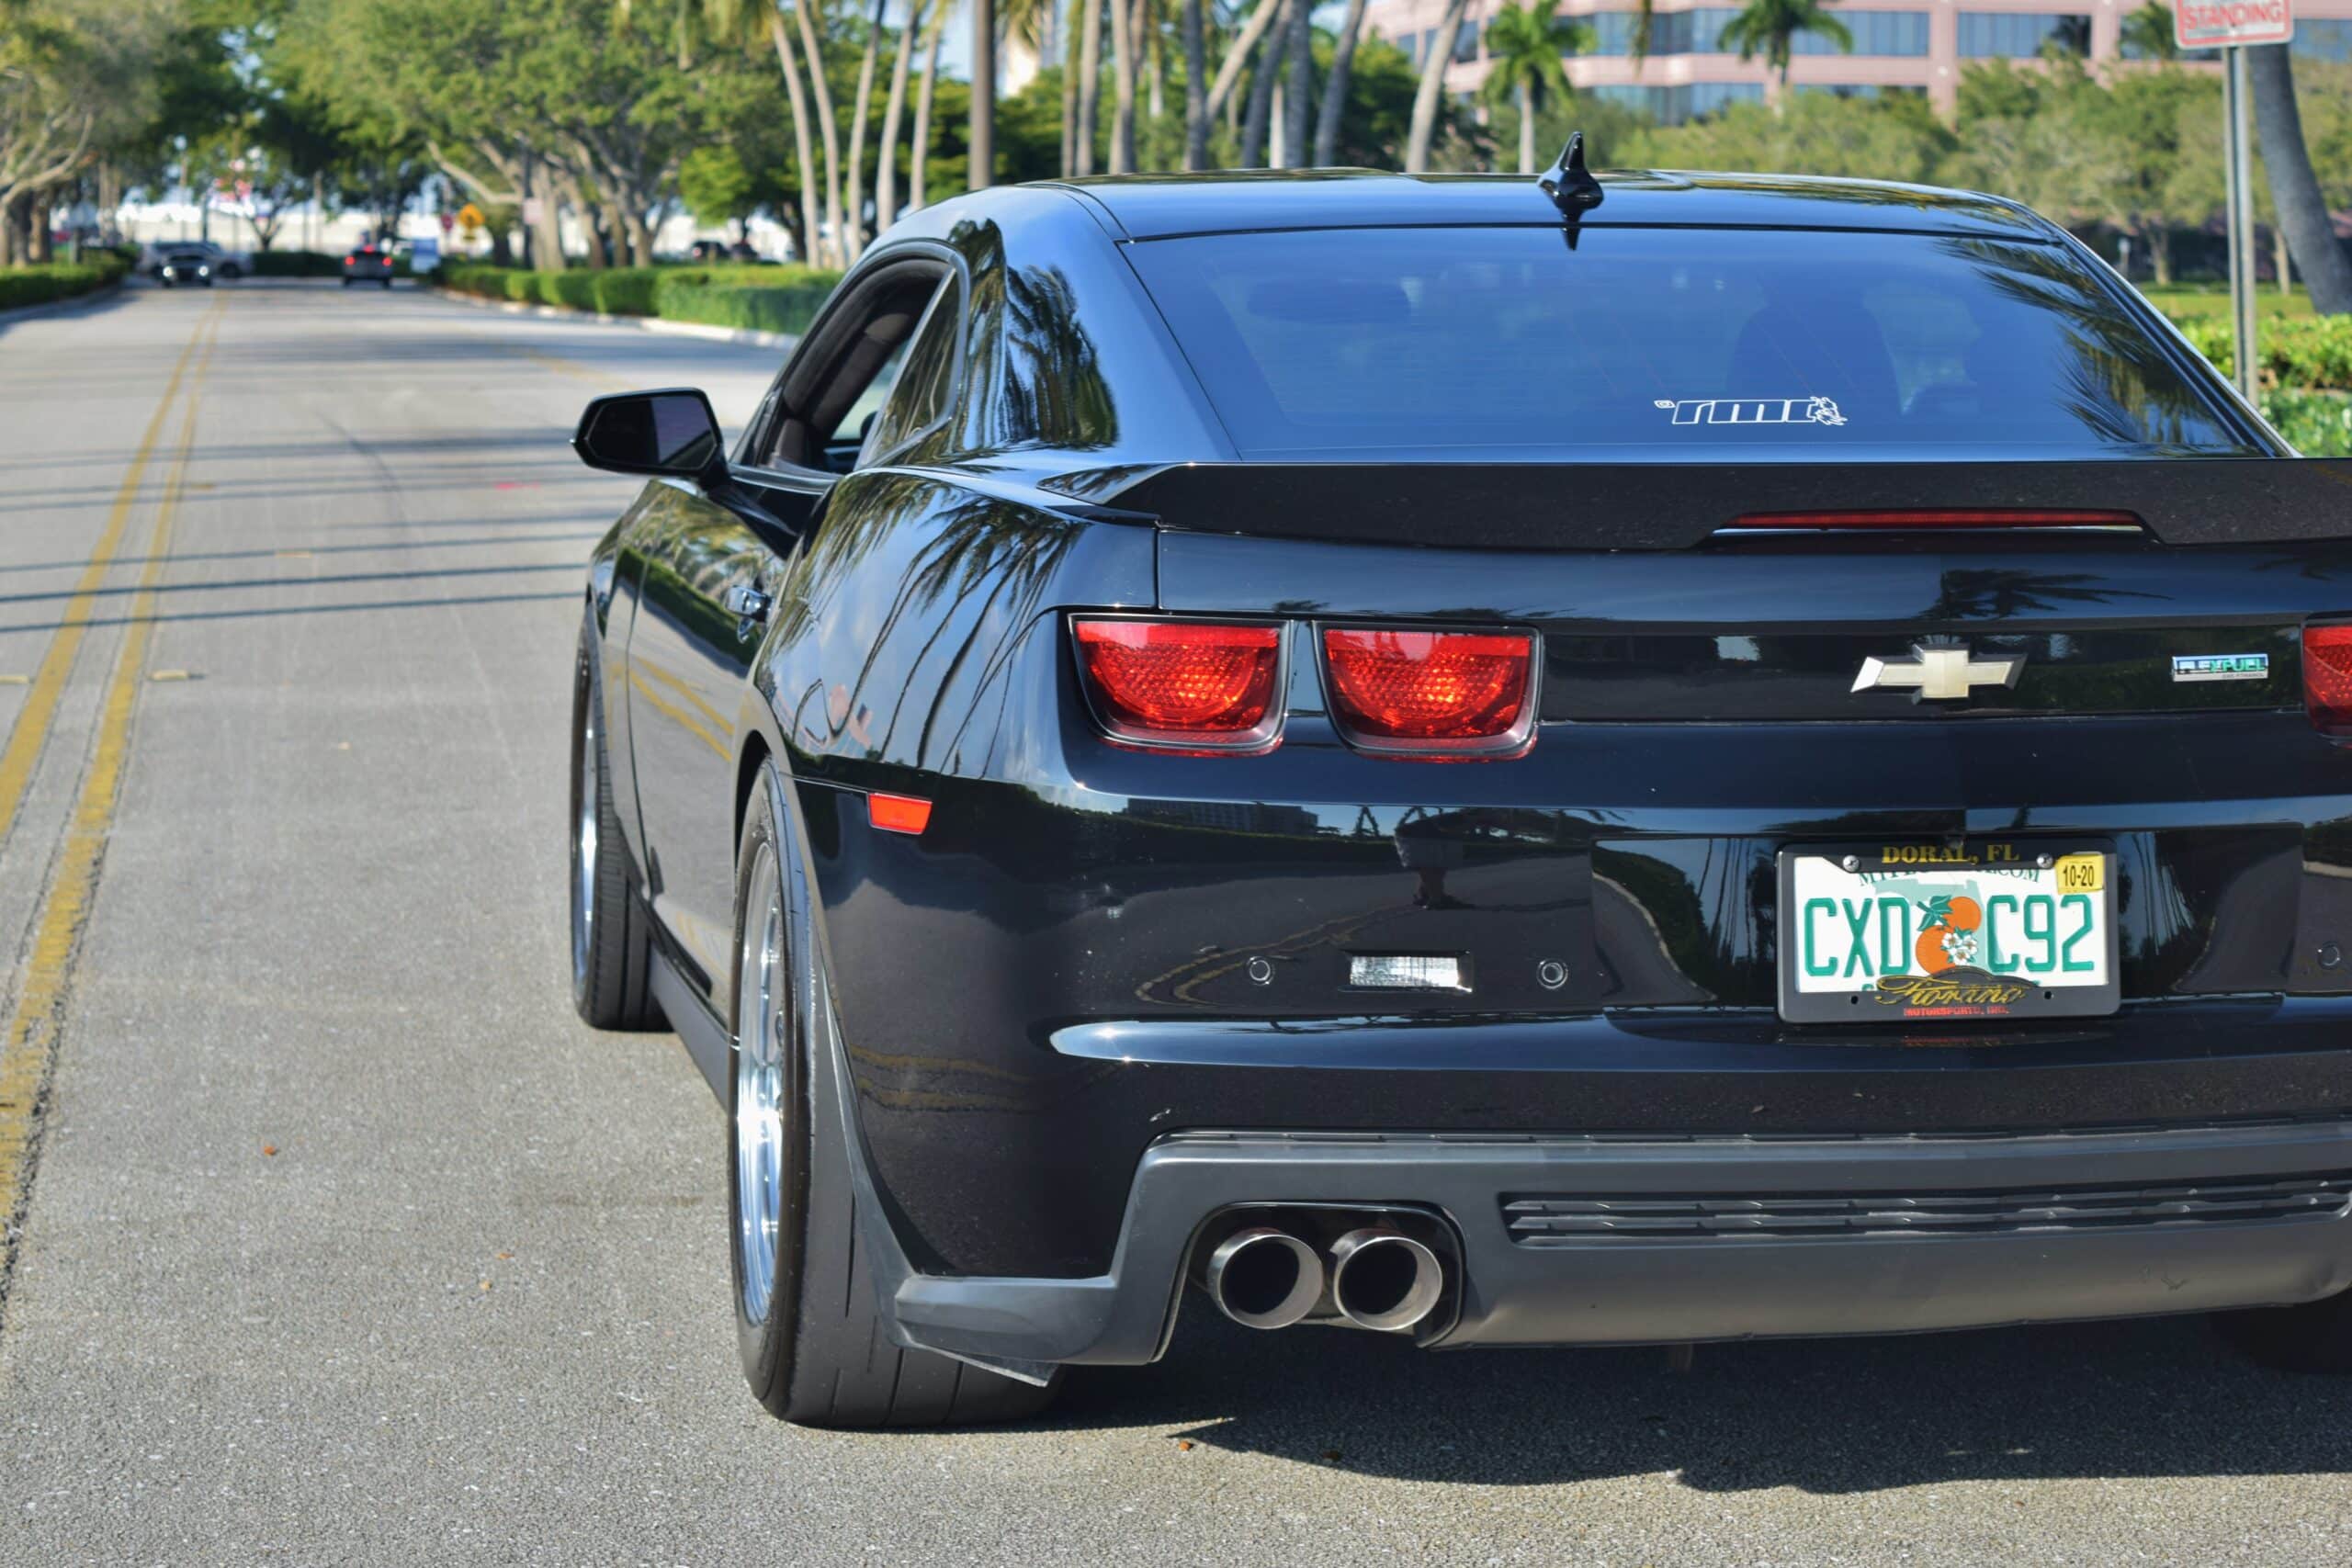 2013 Chevrolet Camaro ZL1 880 HP/LSA SUPERCHARGED – EASY 9 SEC STREET CAR – OVER $95,000 INVESTED